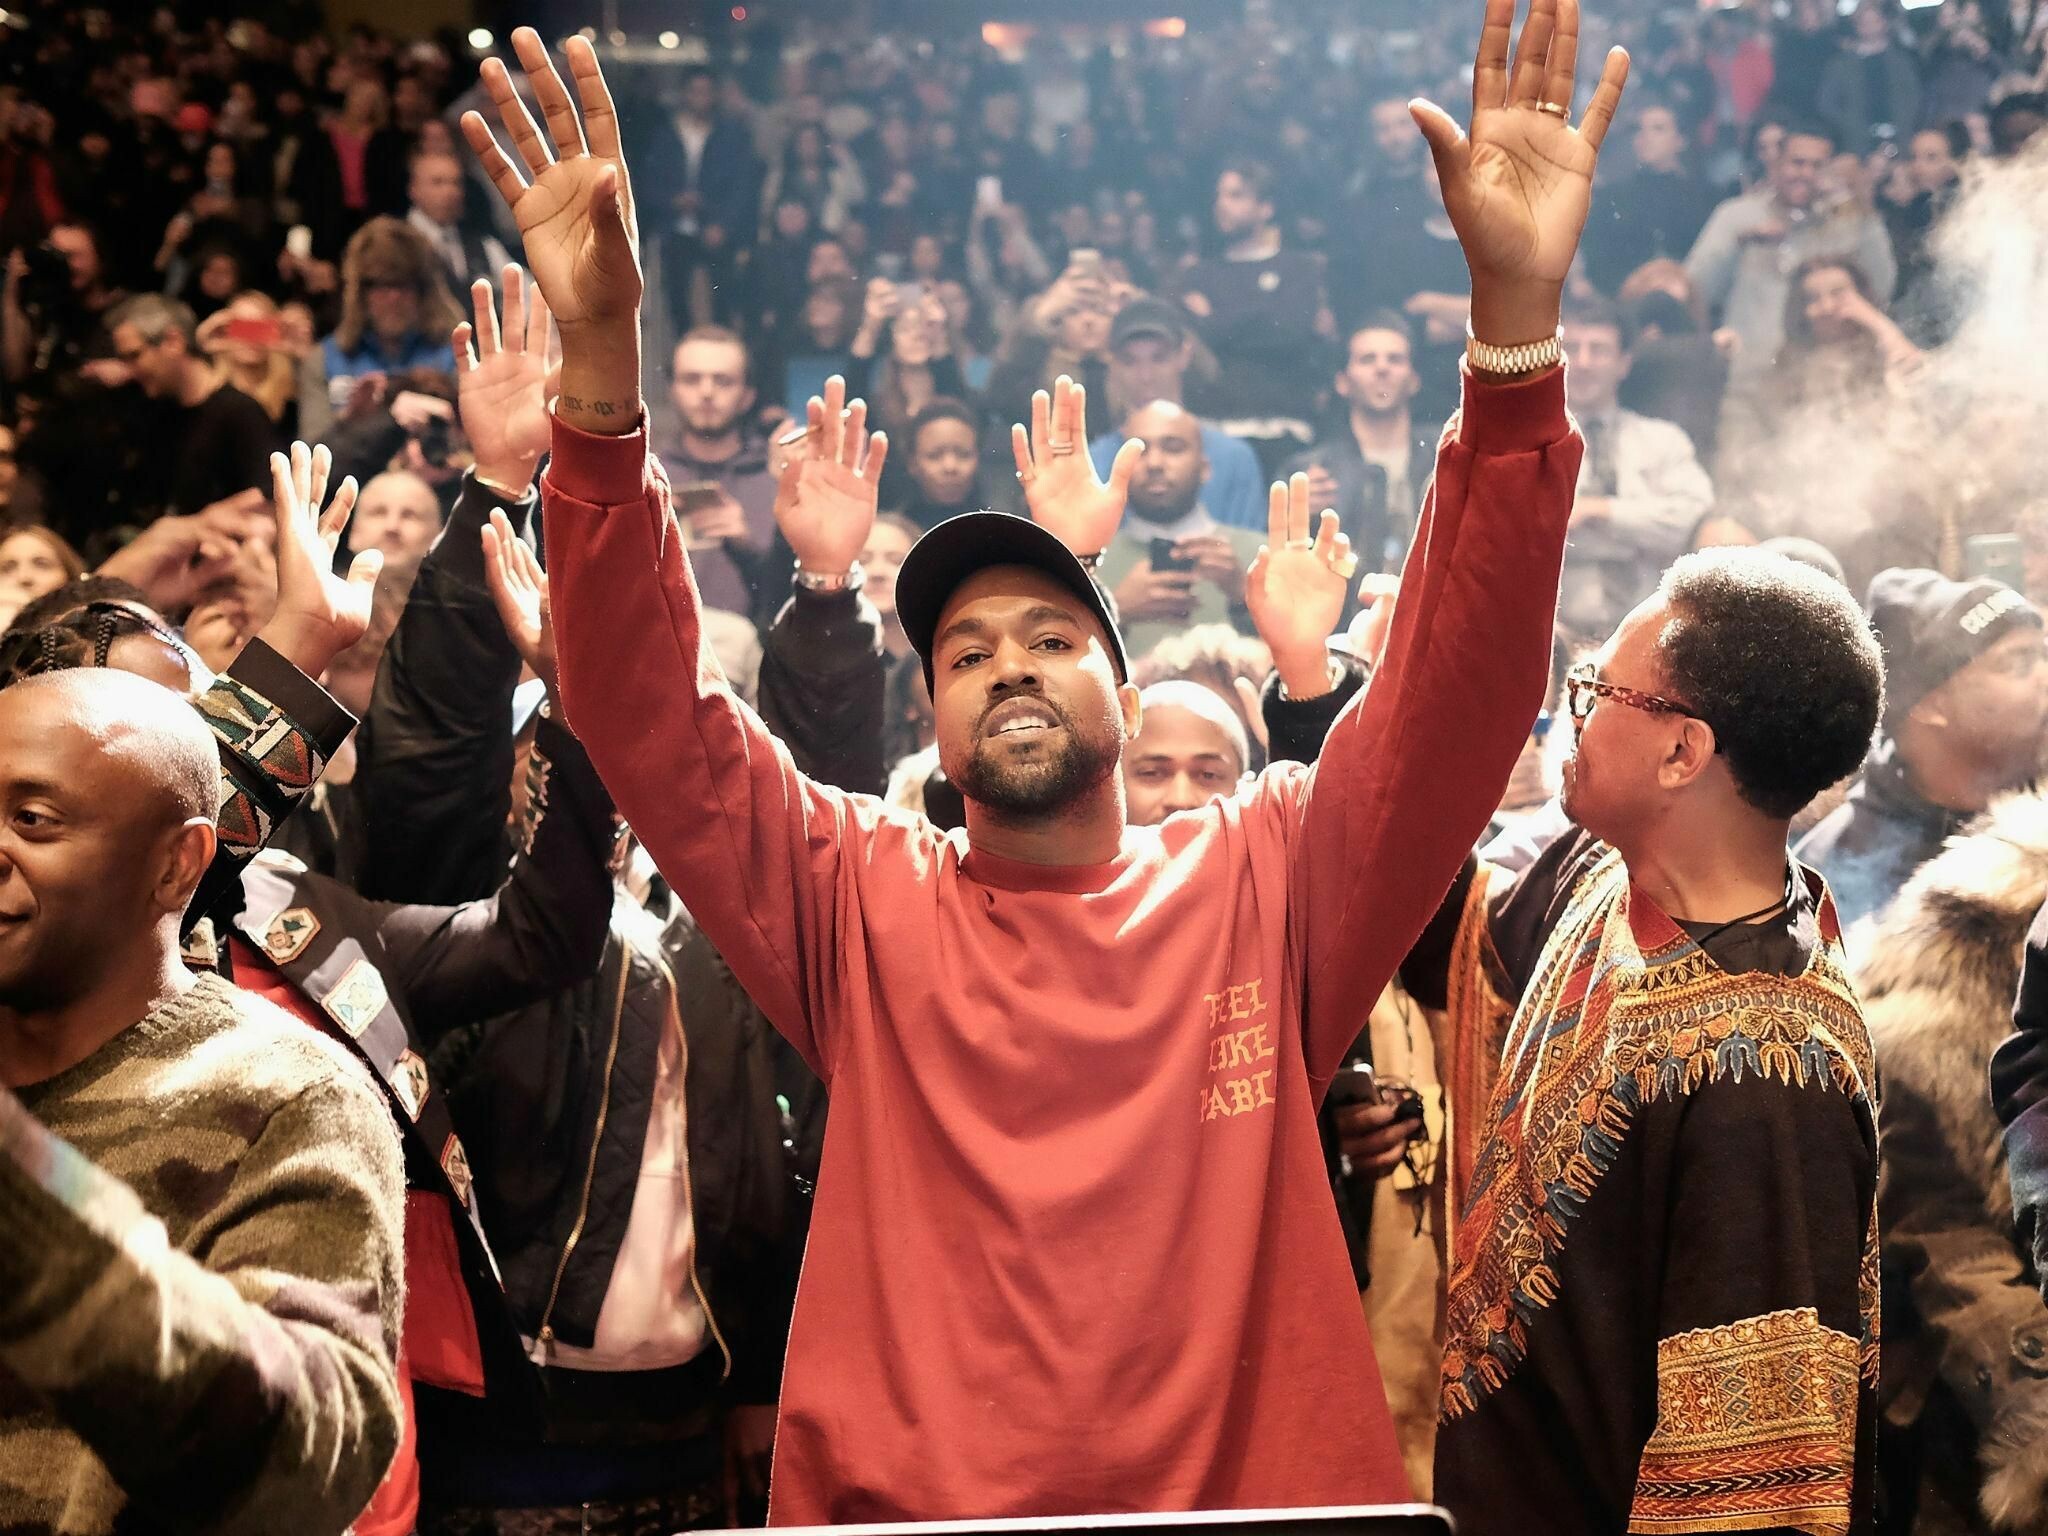 Kanye Wallpapers  Kanye West  Free Download Borrow and Streaming   Internet Archive